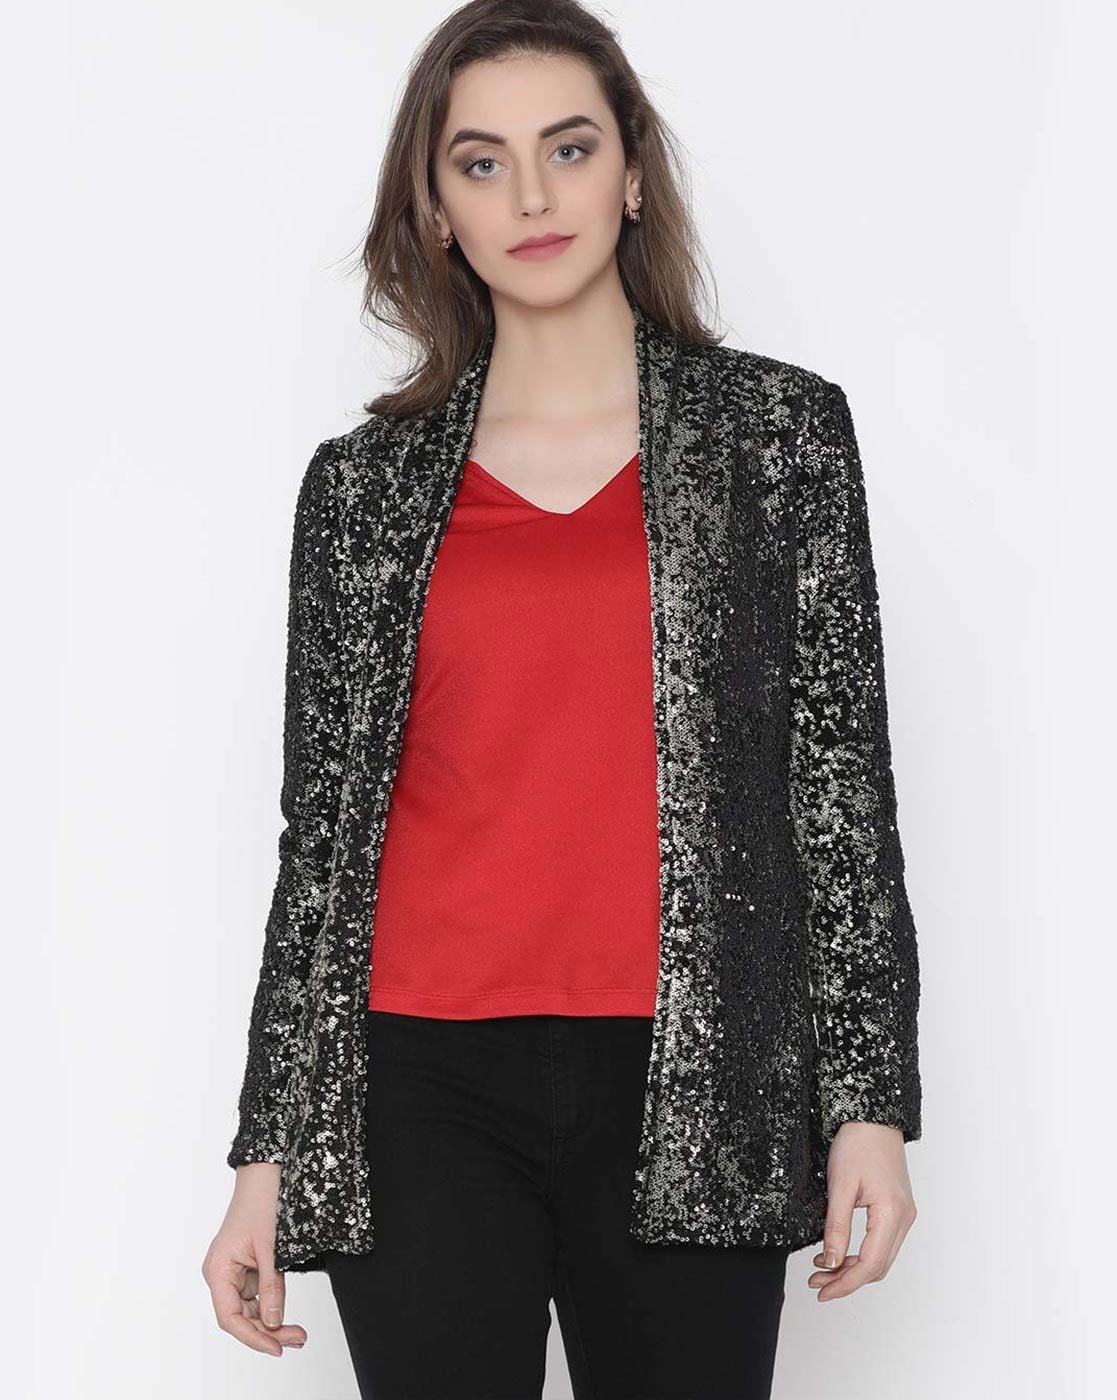 Ladies Party Wear Maroon Sequin Jacket, Size: Medium at Rs 299 in New Delhi